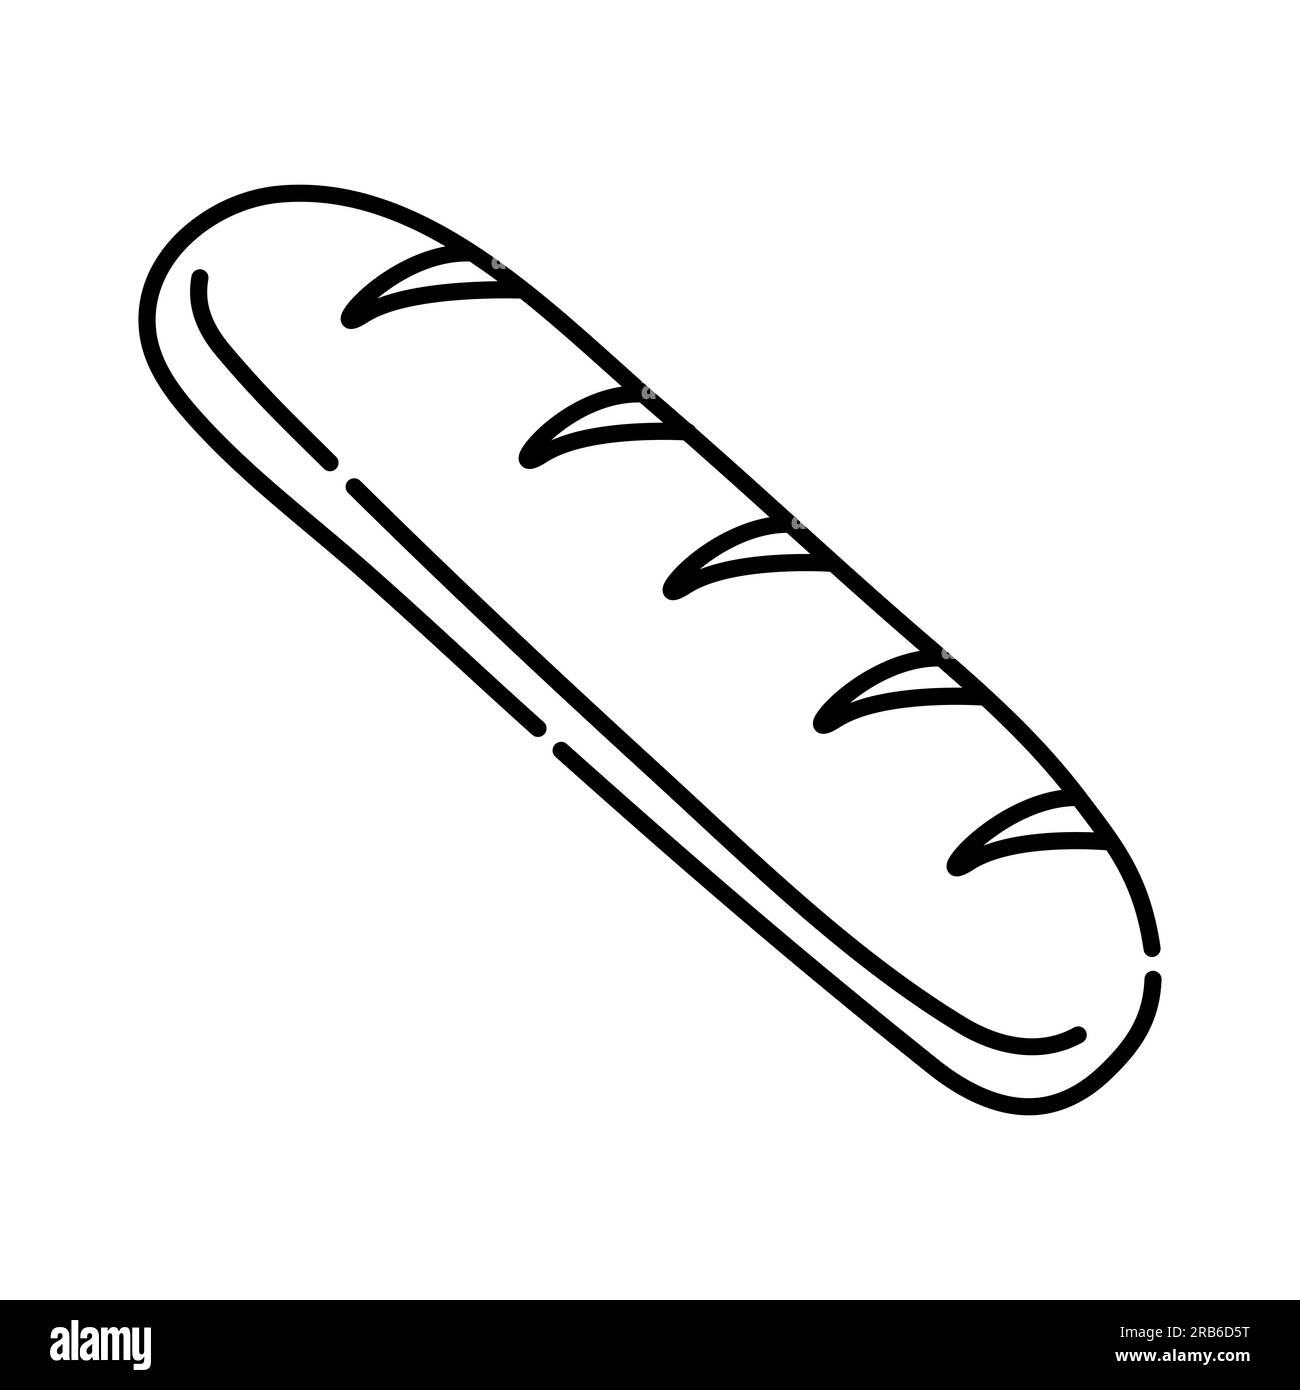 Long loaf, baguette, black and white vector line icon Stock Vector